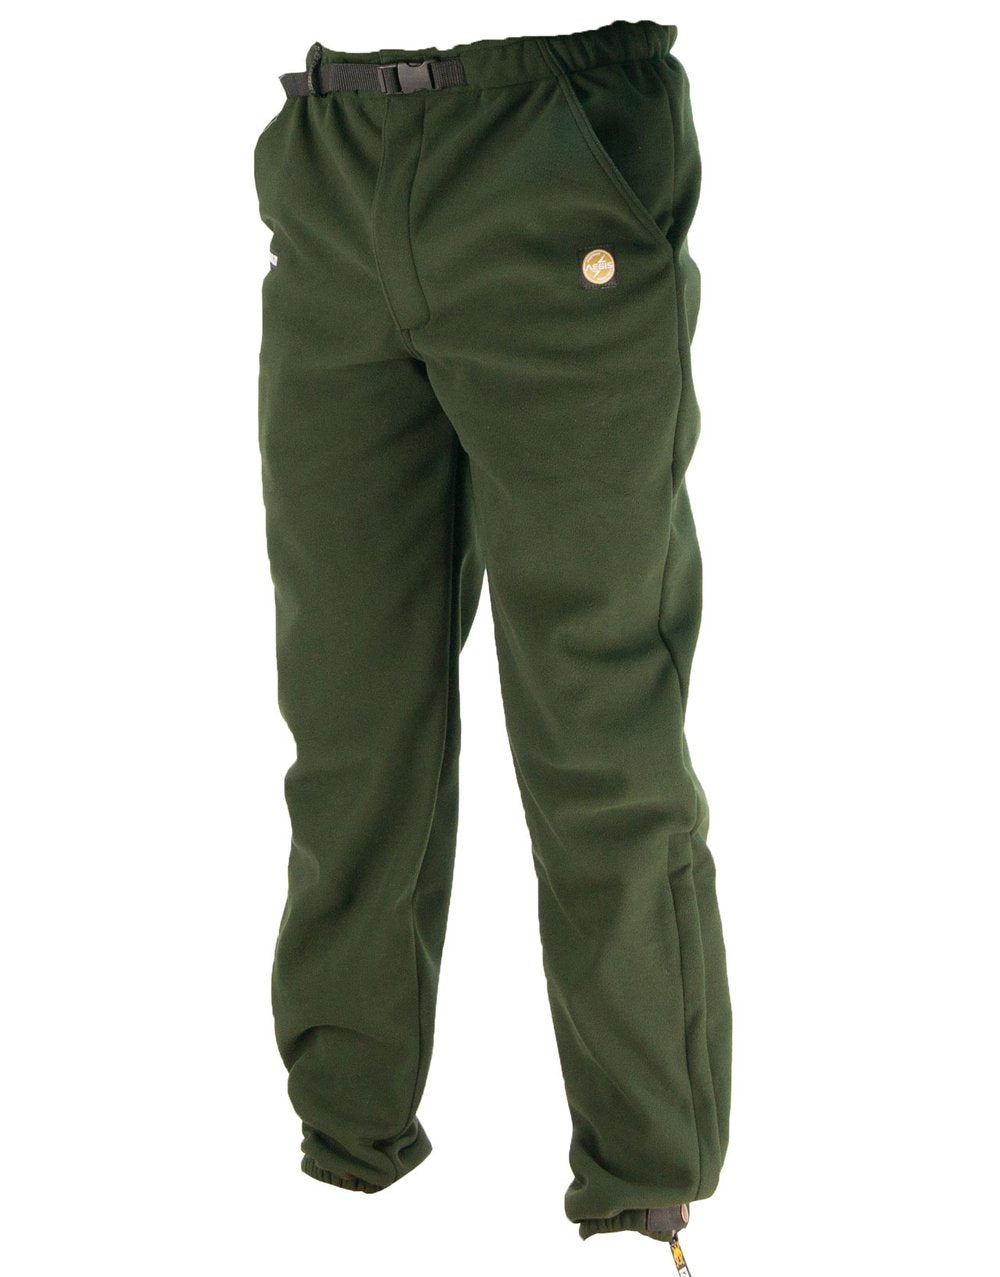 Swazi 4wd Pants Olive - M / OLIVE - Mansfield Hunting & Fishing - Products to prepare for Corona Virus